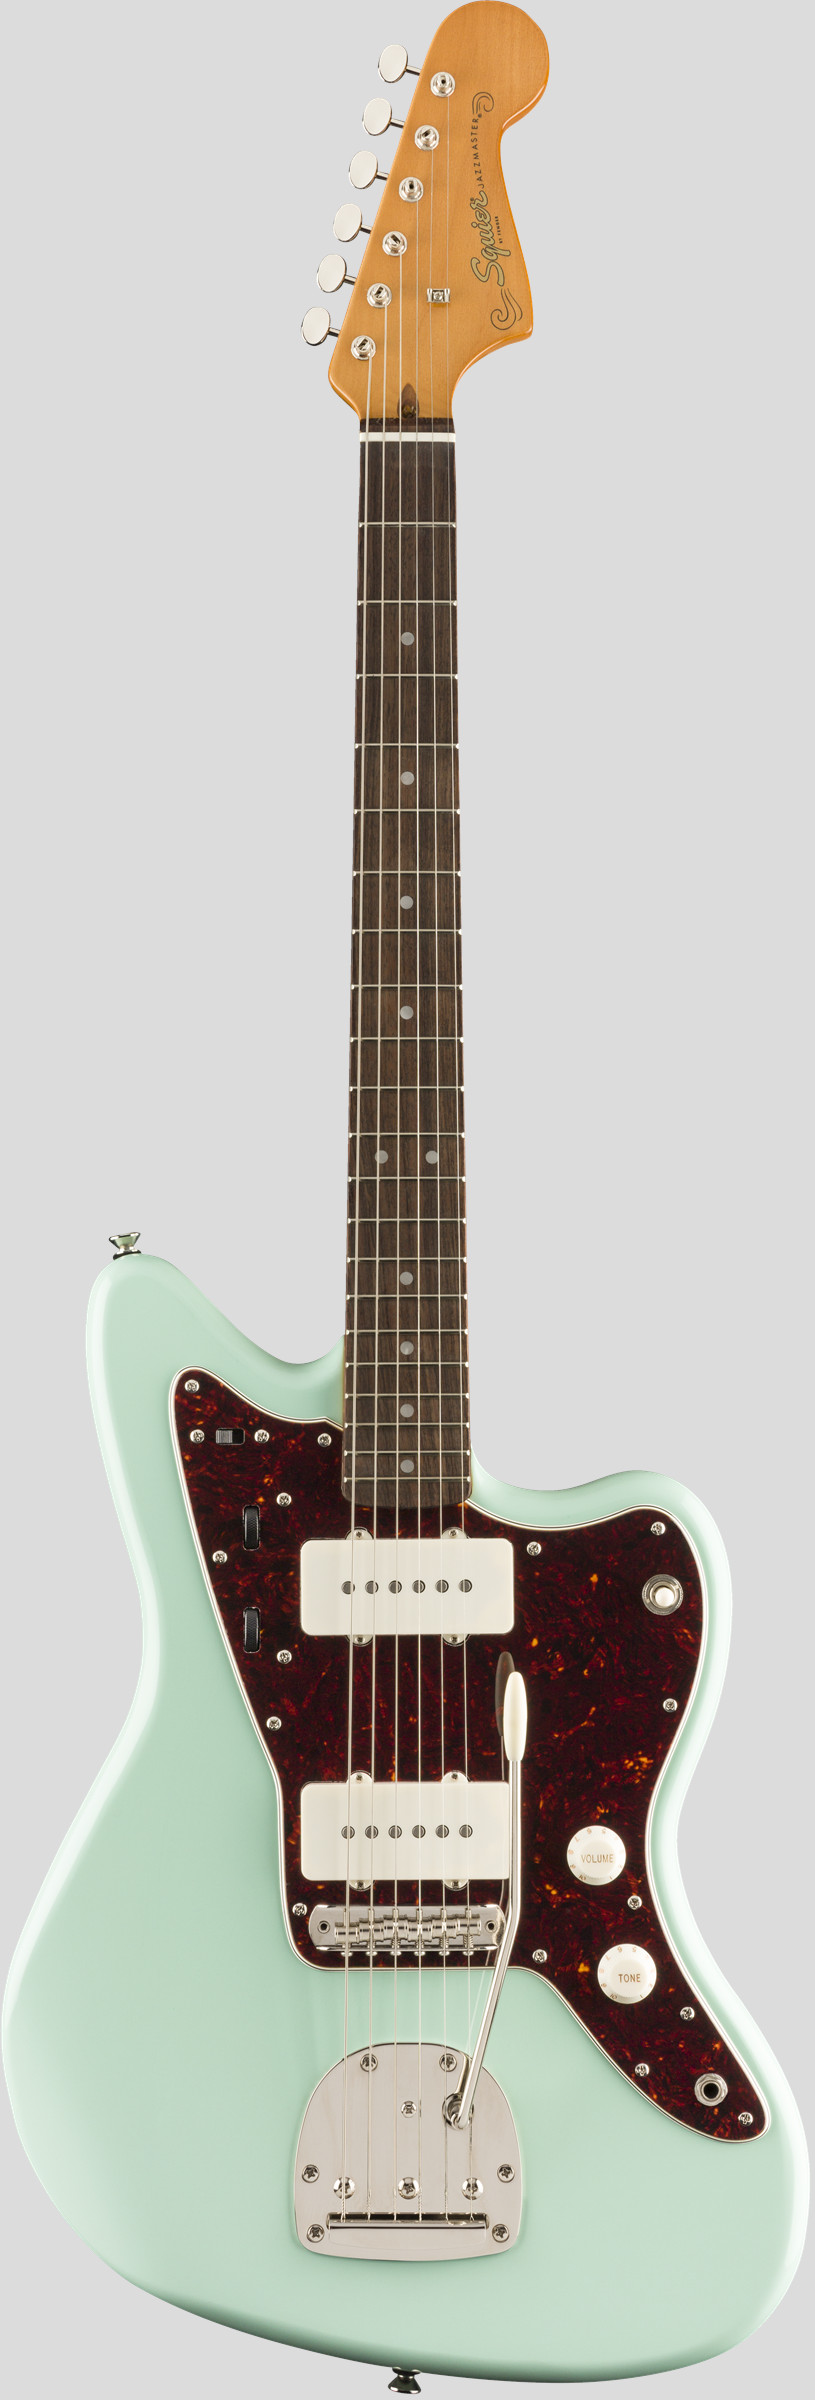 Squier by Fender Limited Edition Classic Vibe 60 Jazzmaster Surf Green 1